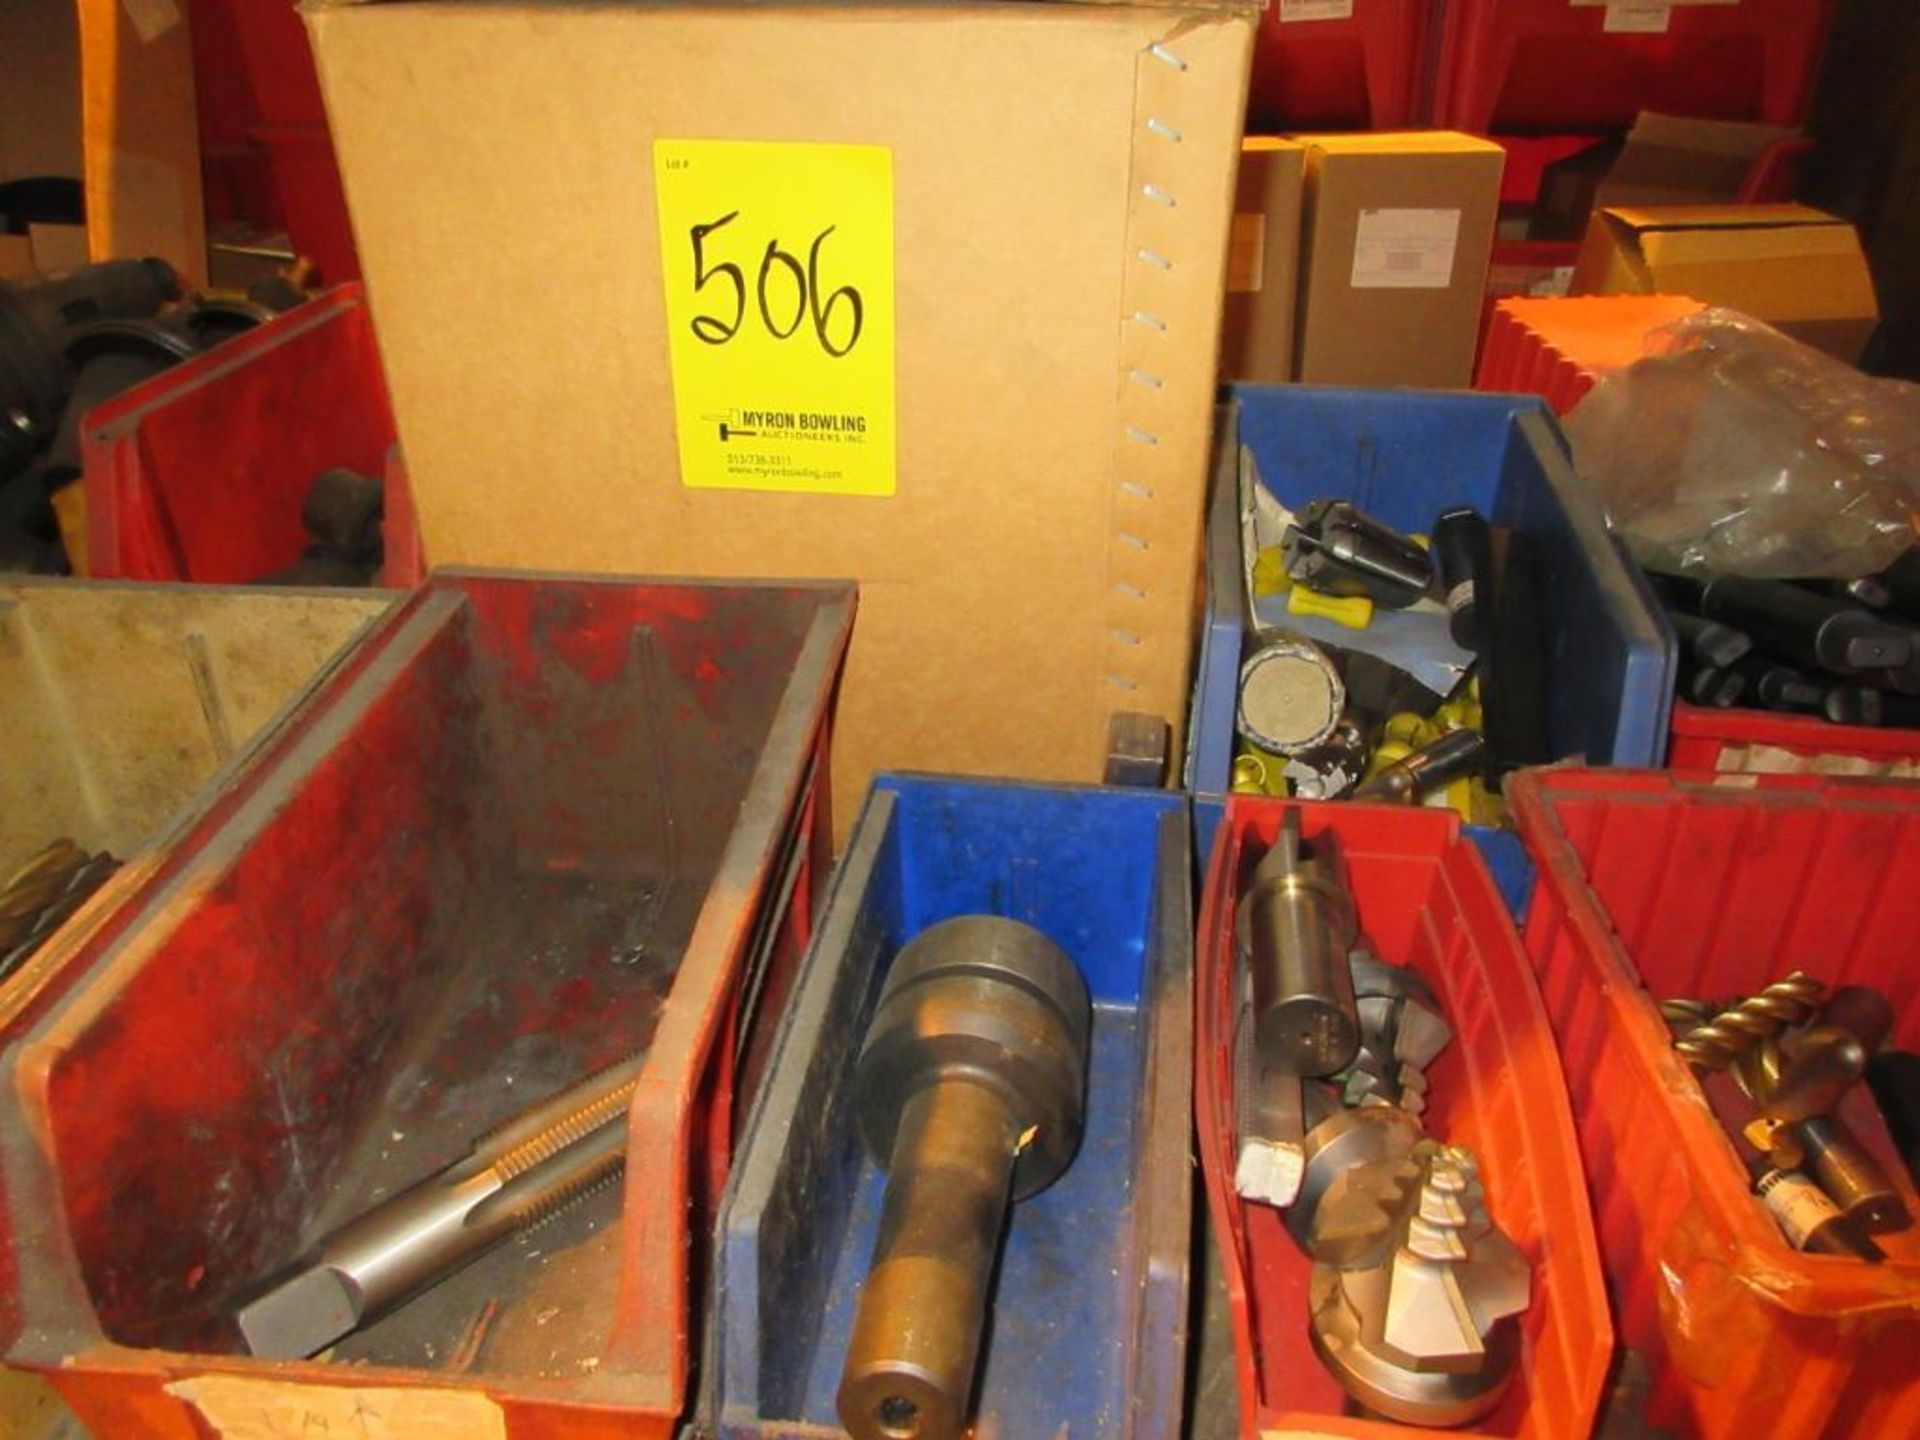 CONTENTS OF (22) SECTIONS PALLET RACK: ASSORTED ABRASIVES, SUNNEN STONES, TOOL BITS, DOVETAIL CUTTER - Image 33 of 43